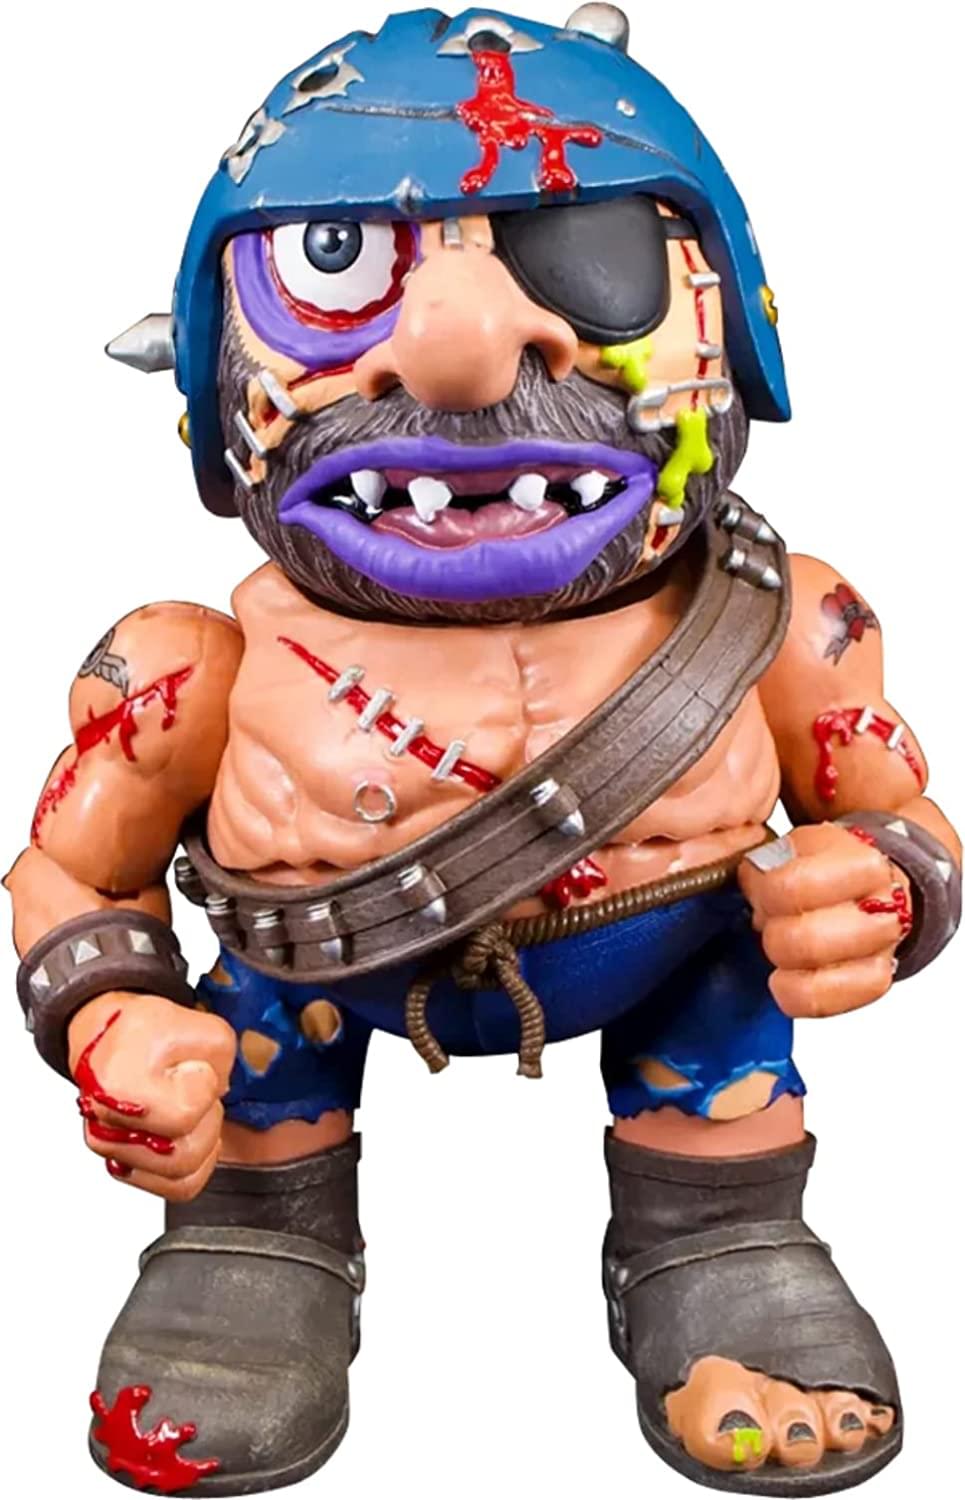 Madballs 6 Inch Action Figure , Bruise Brother